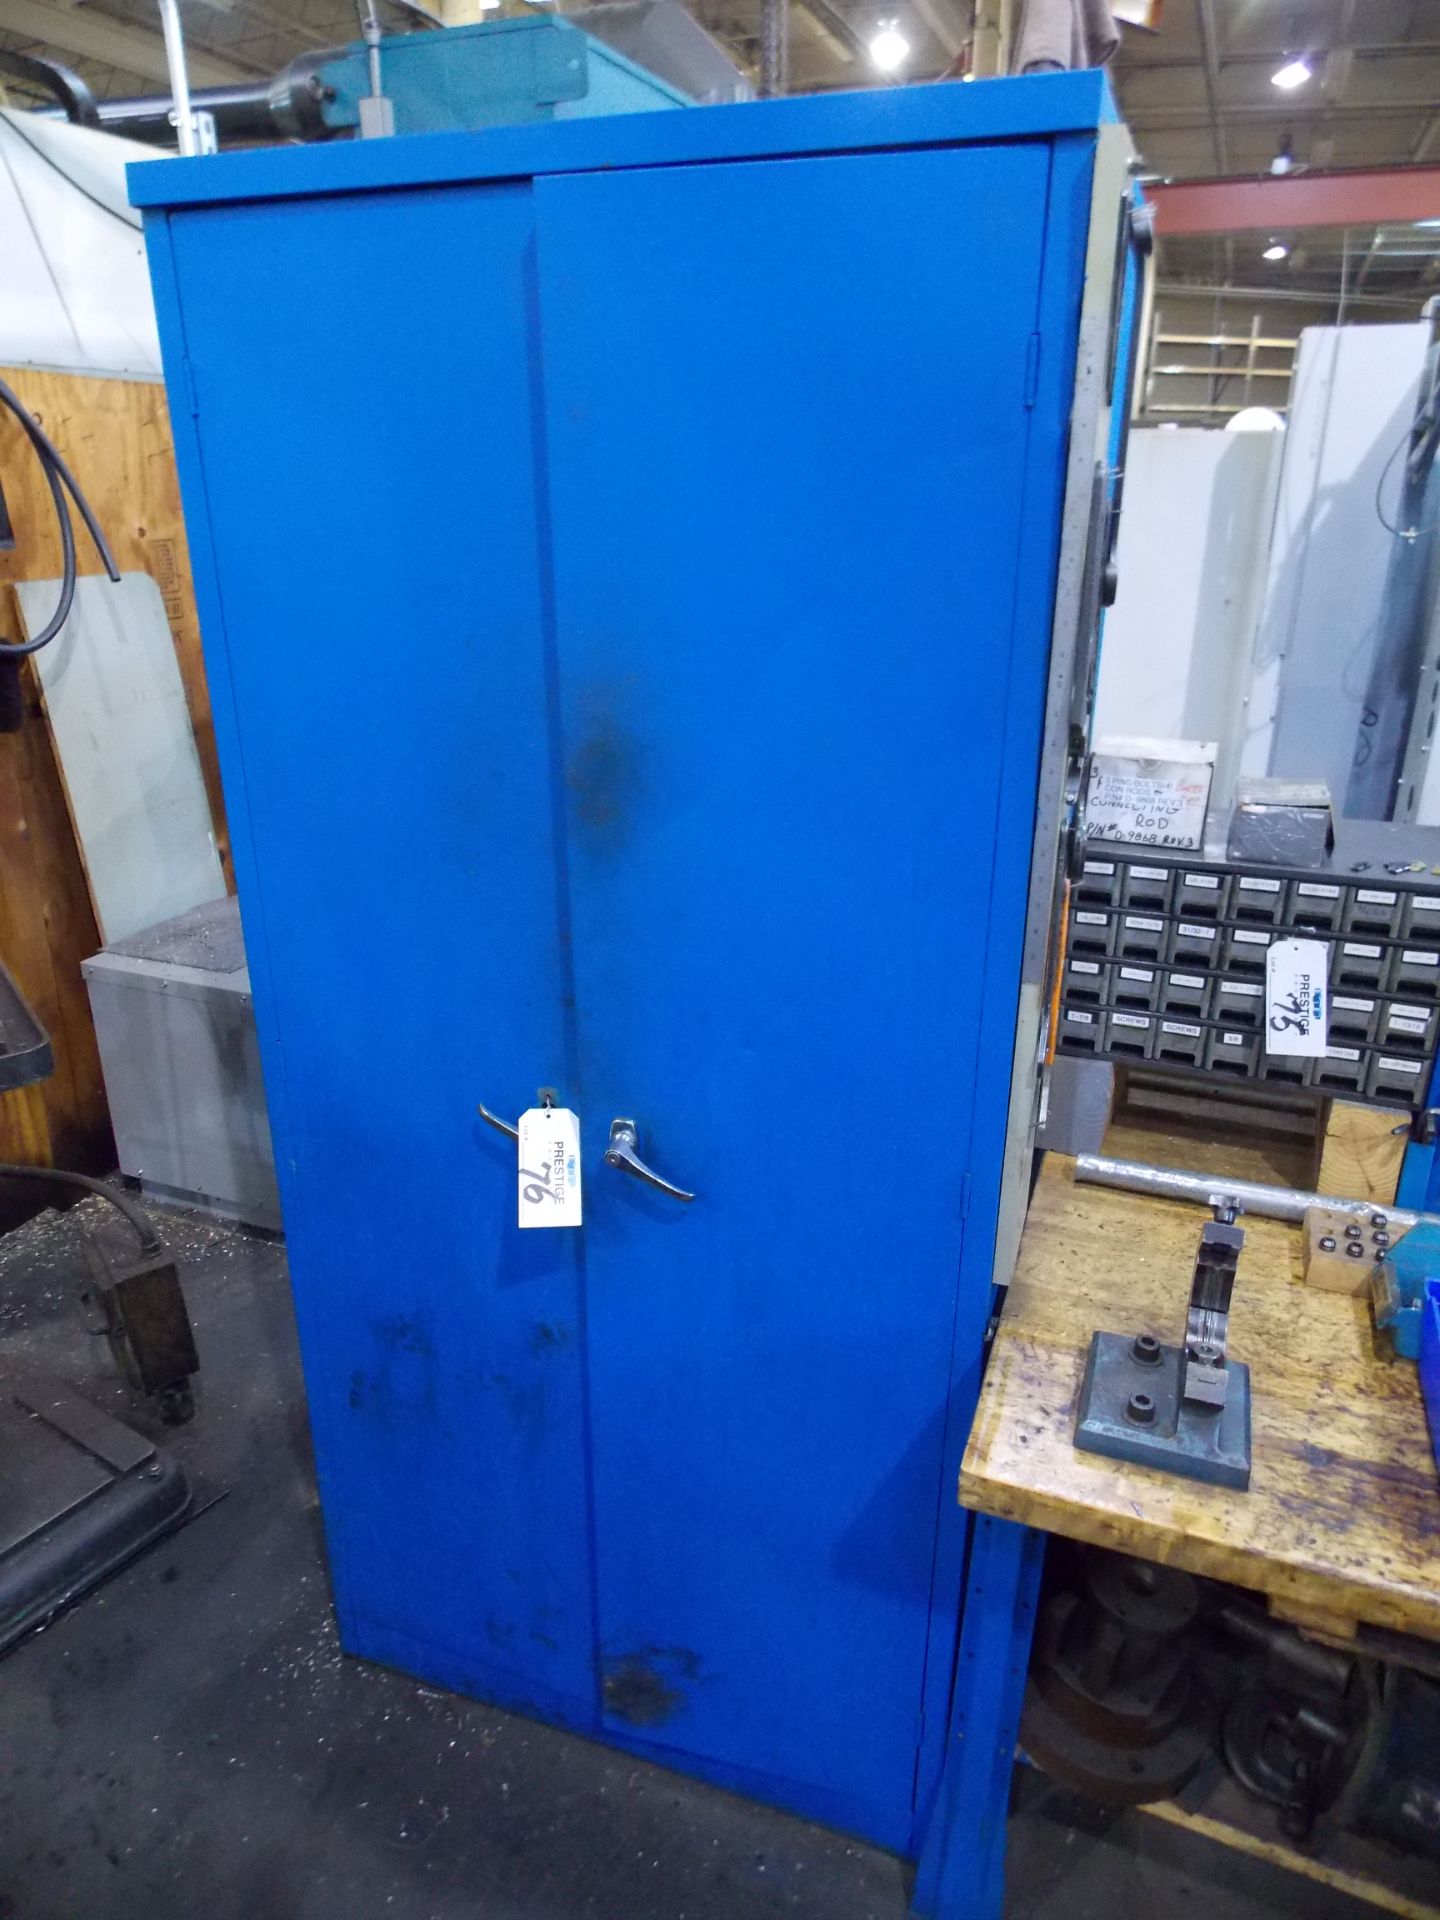 Lot: 2 Door Cabinet with Tooling Contents